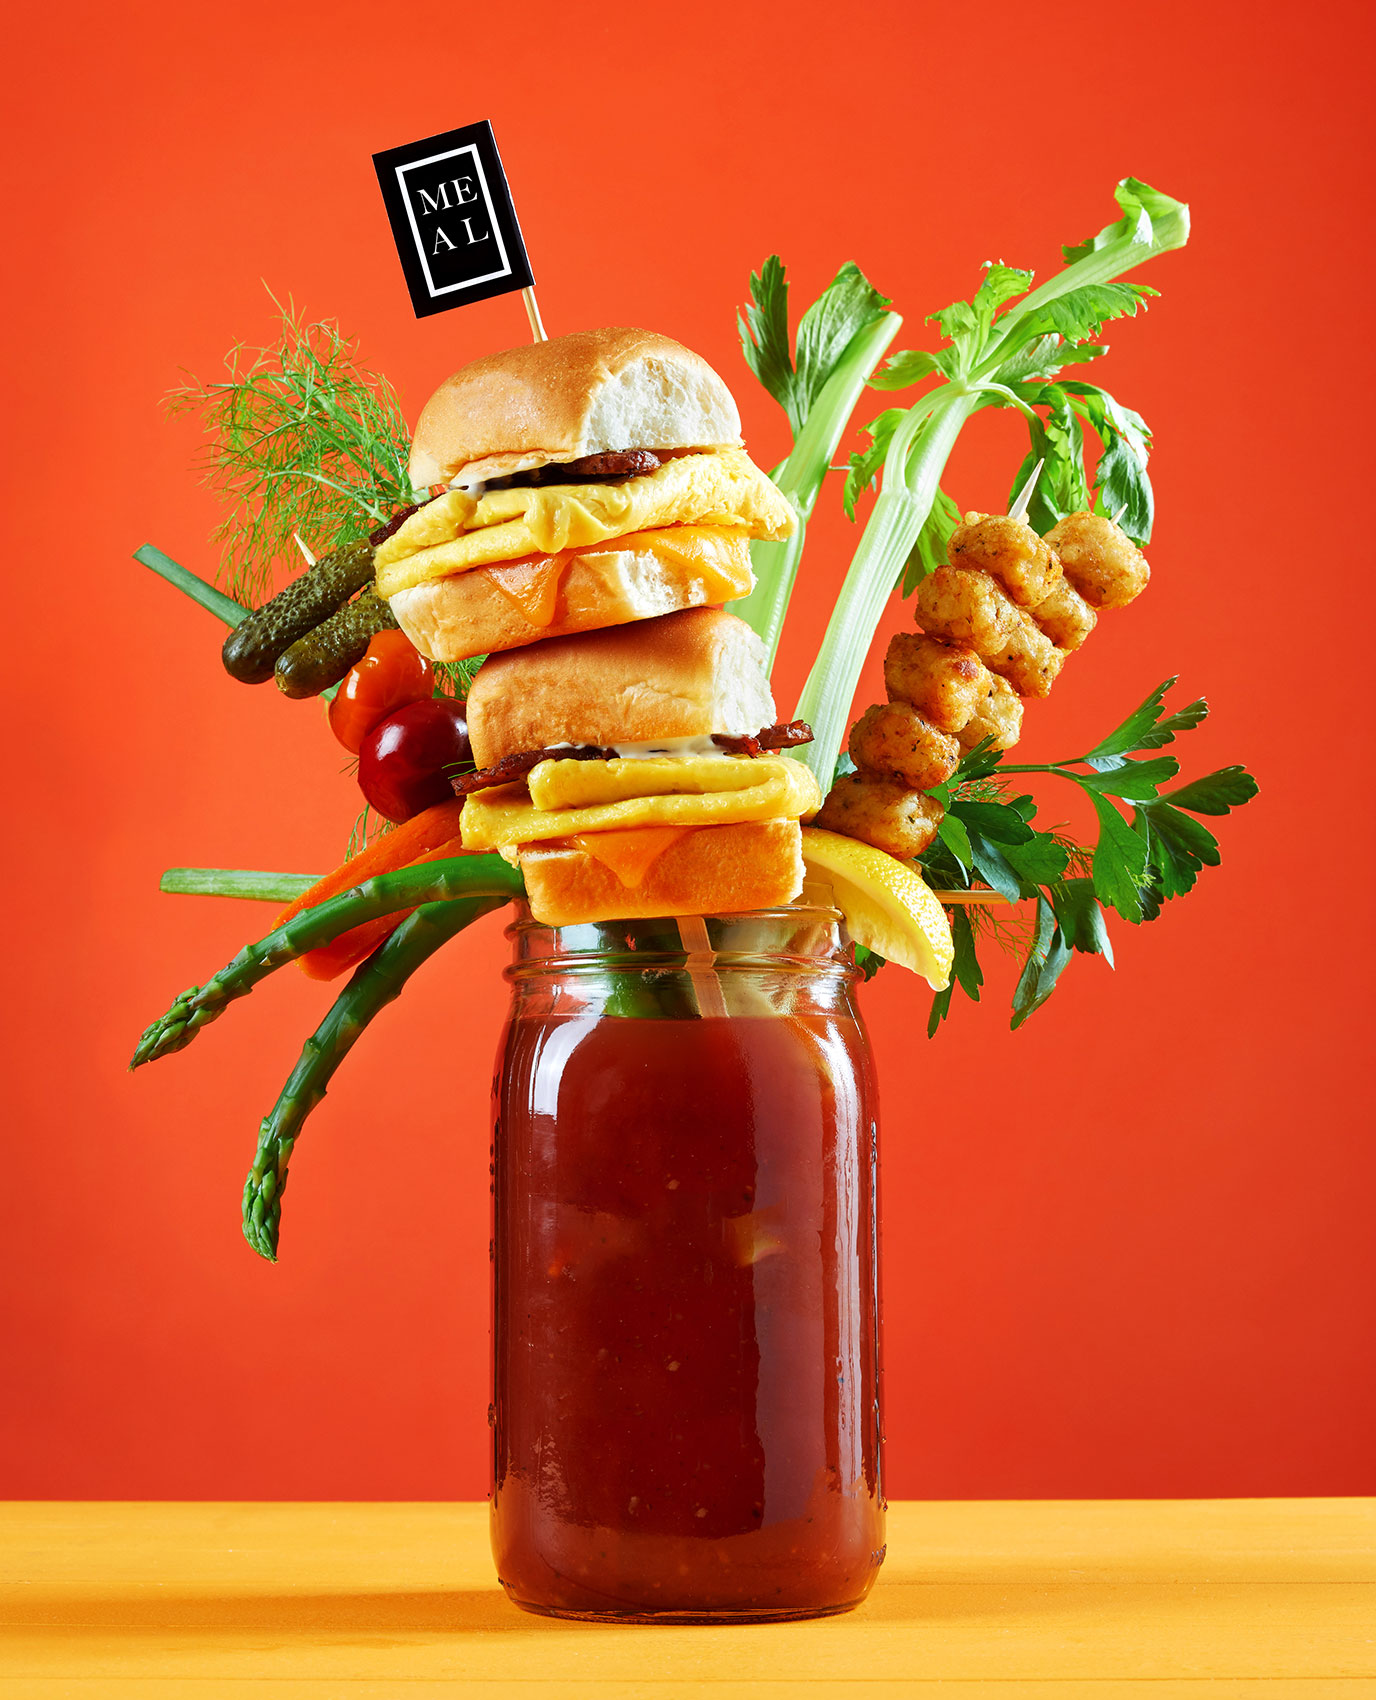 Bloody-Mary-Meal-with-JEgg-scrambled-Sliders-foldover-egg_RT3